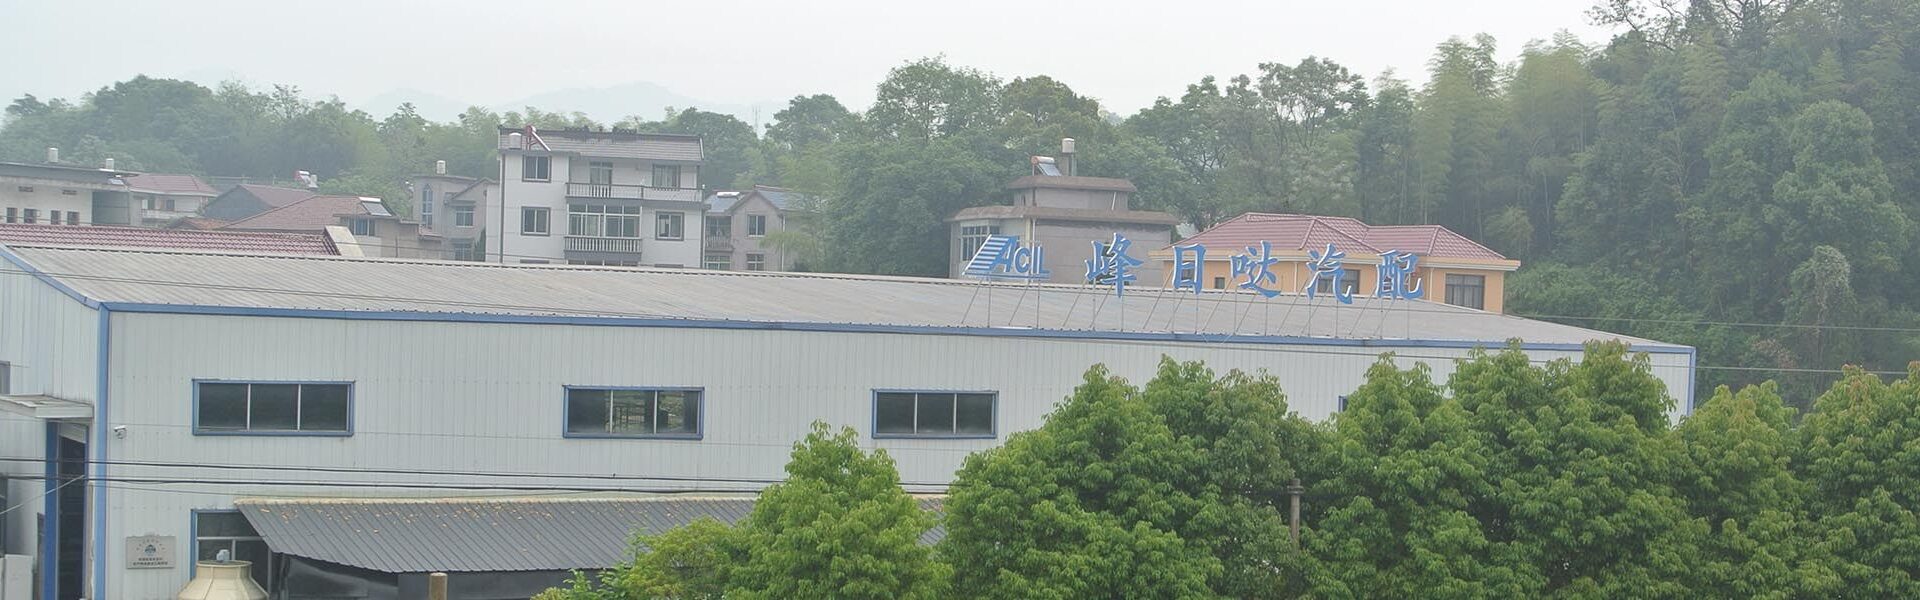 Acil Factory Overview